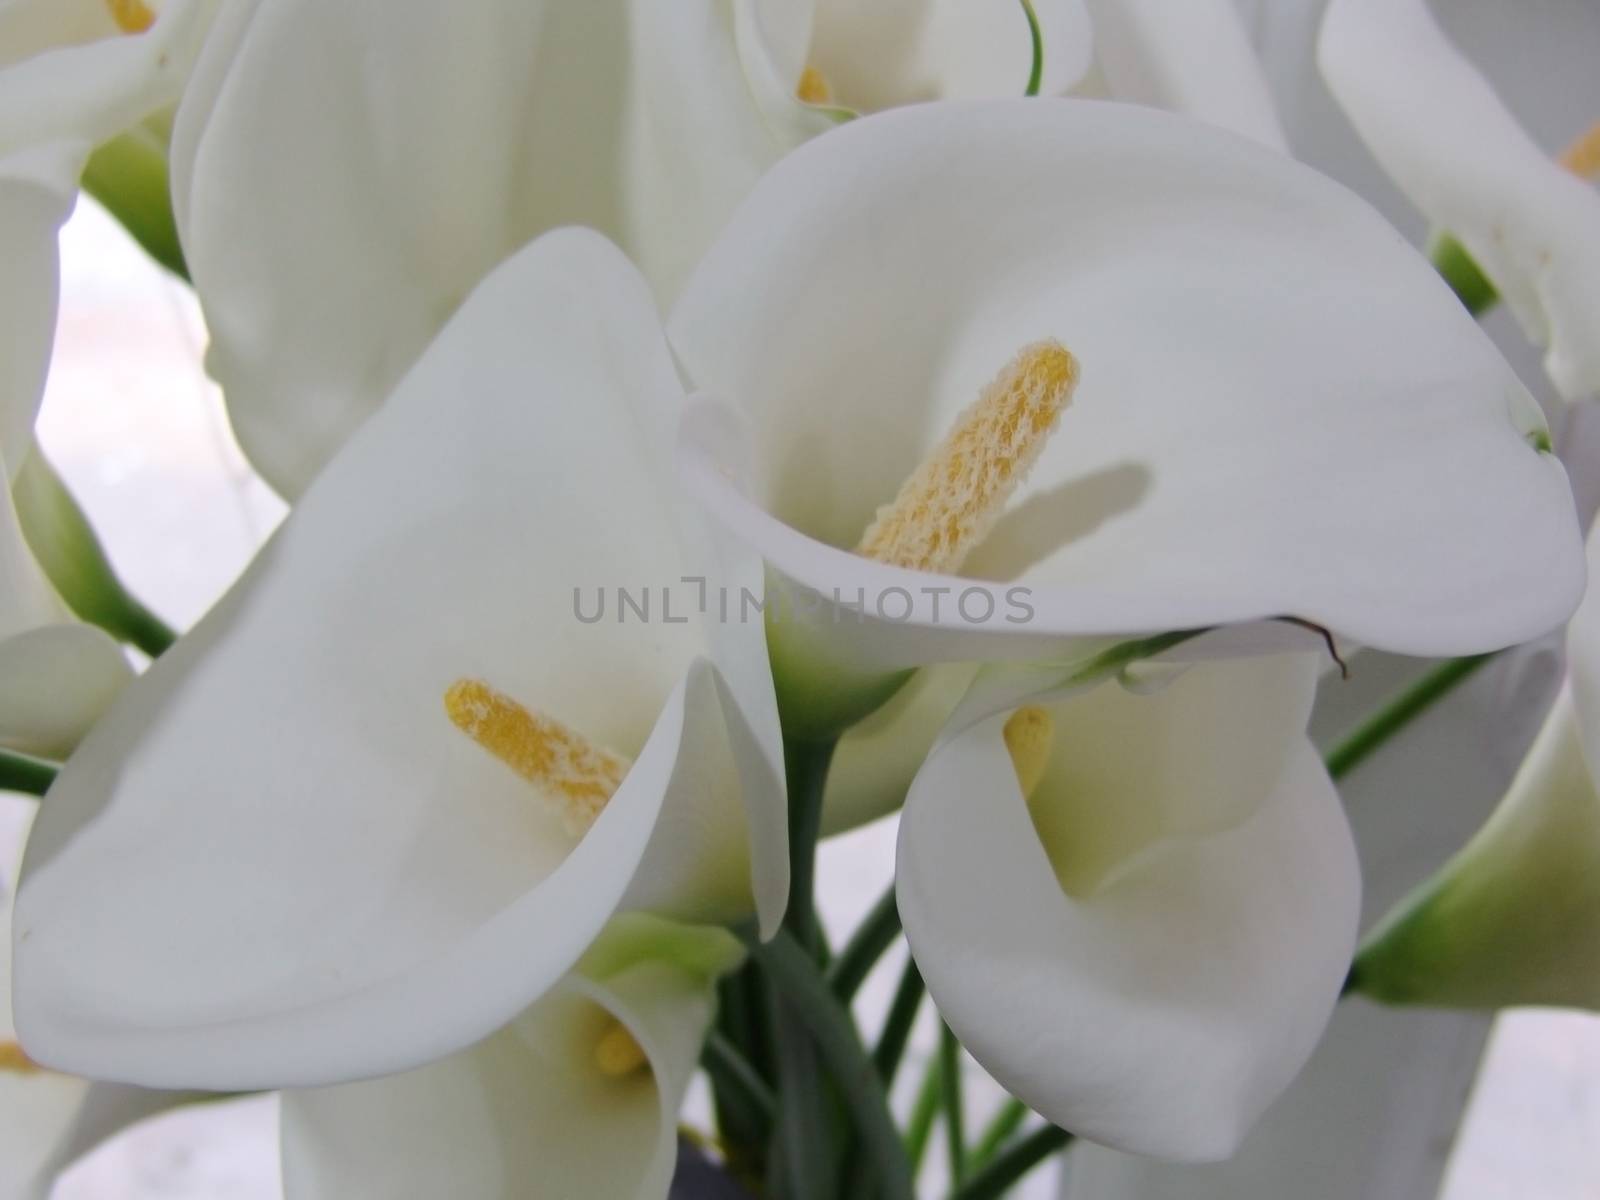 Calla lily flowers by elena_vz